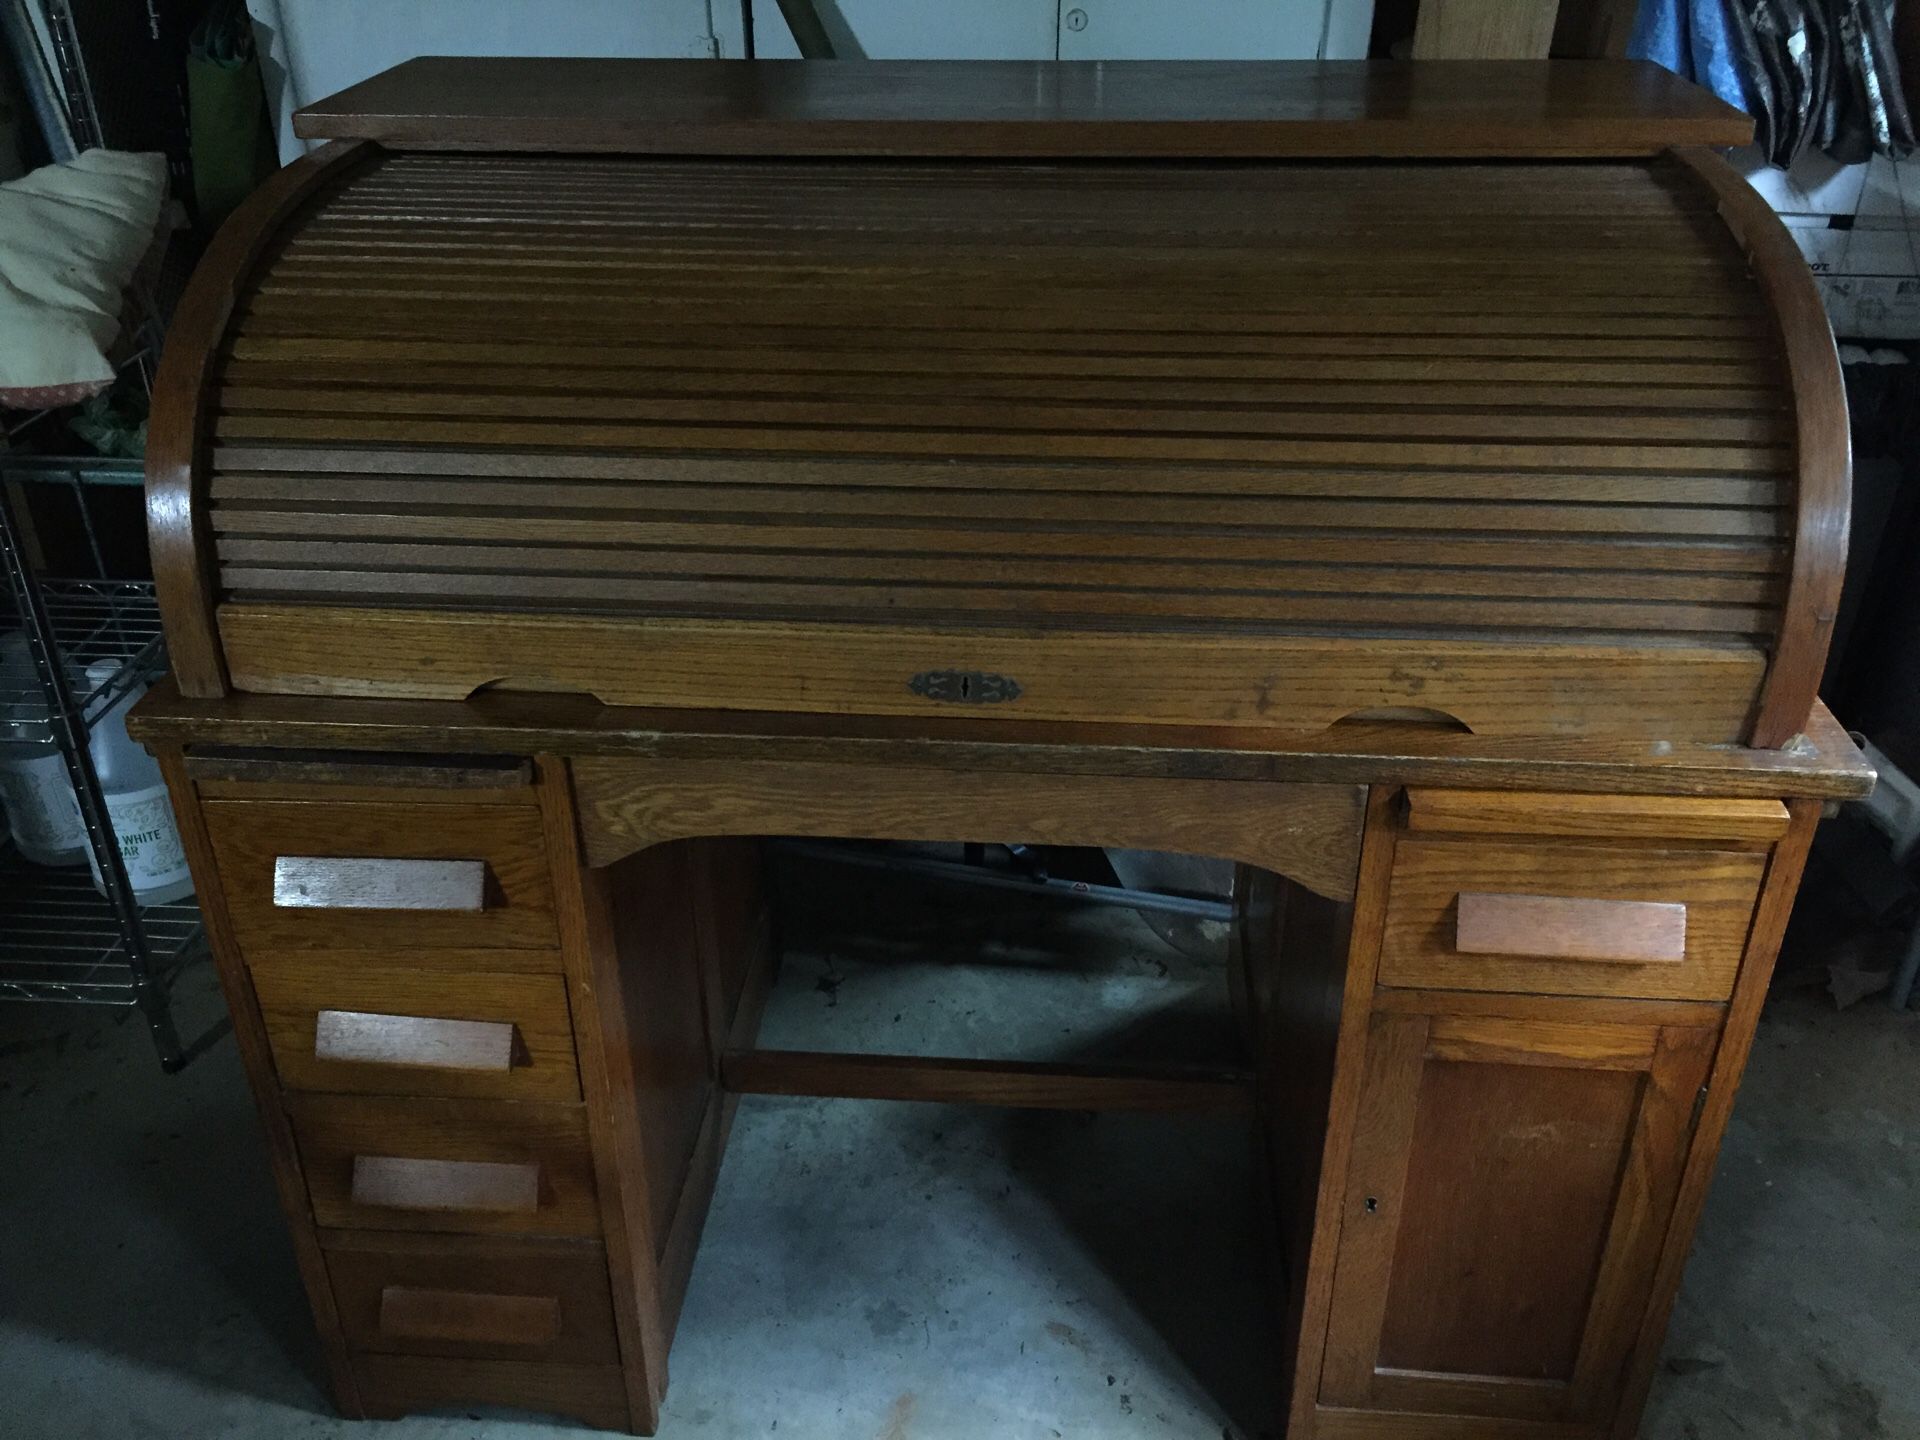 Antique Roll top desk. Top & drawers work!